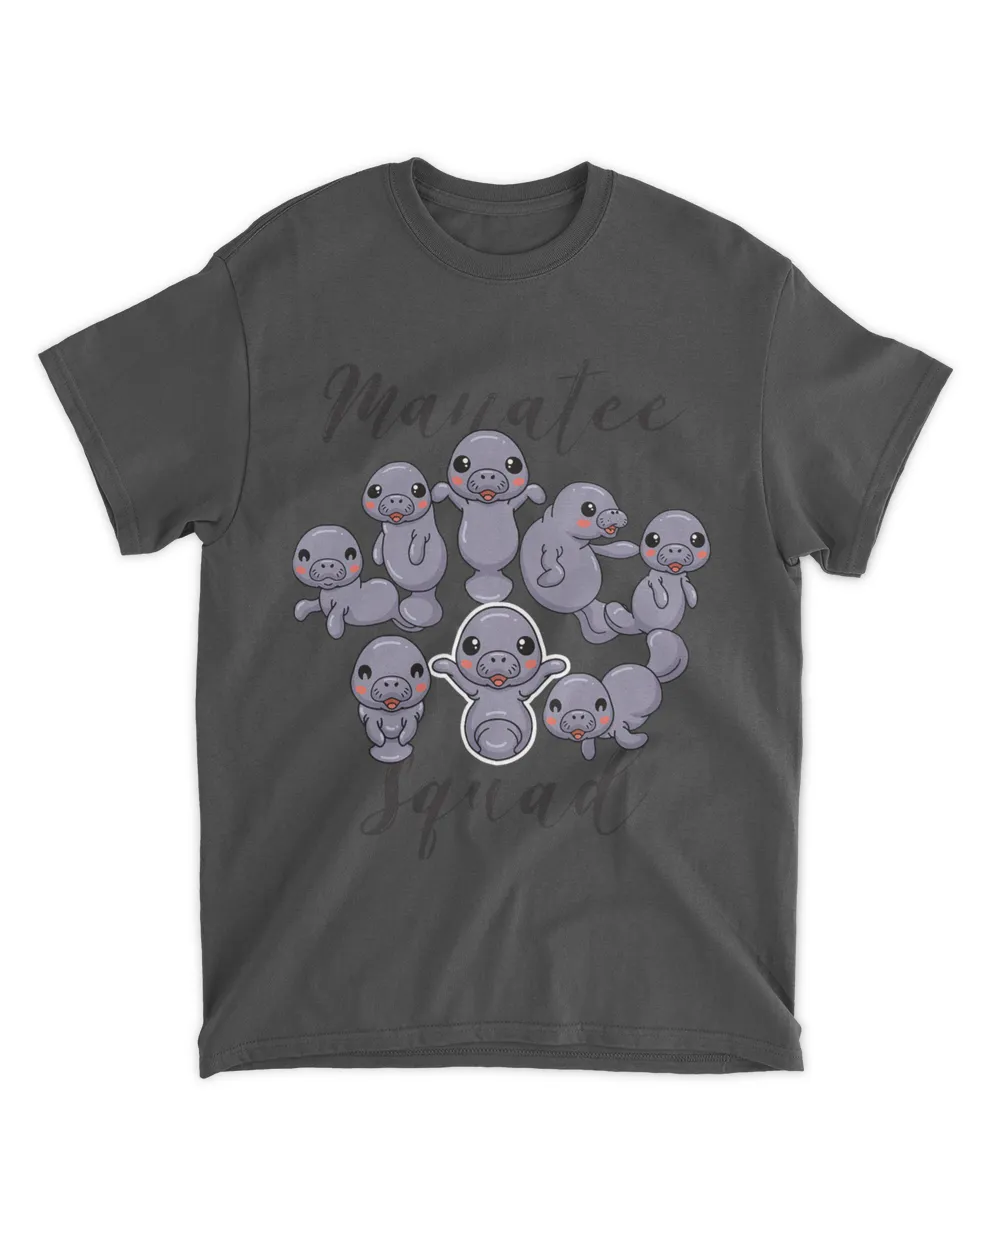 Manatee Squad for friends squad or office school Teams